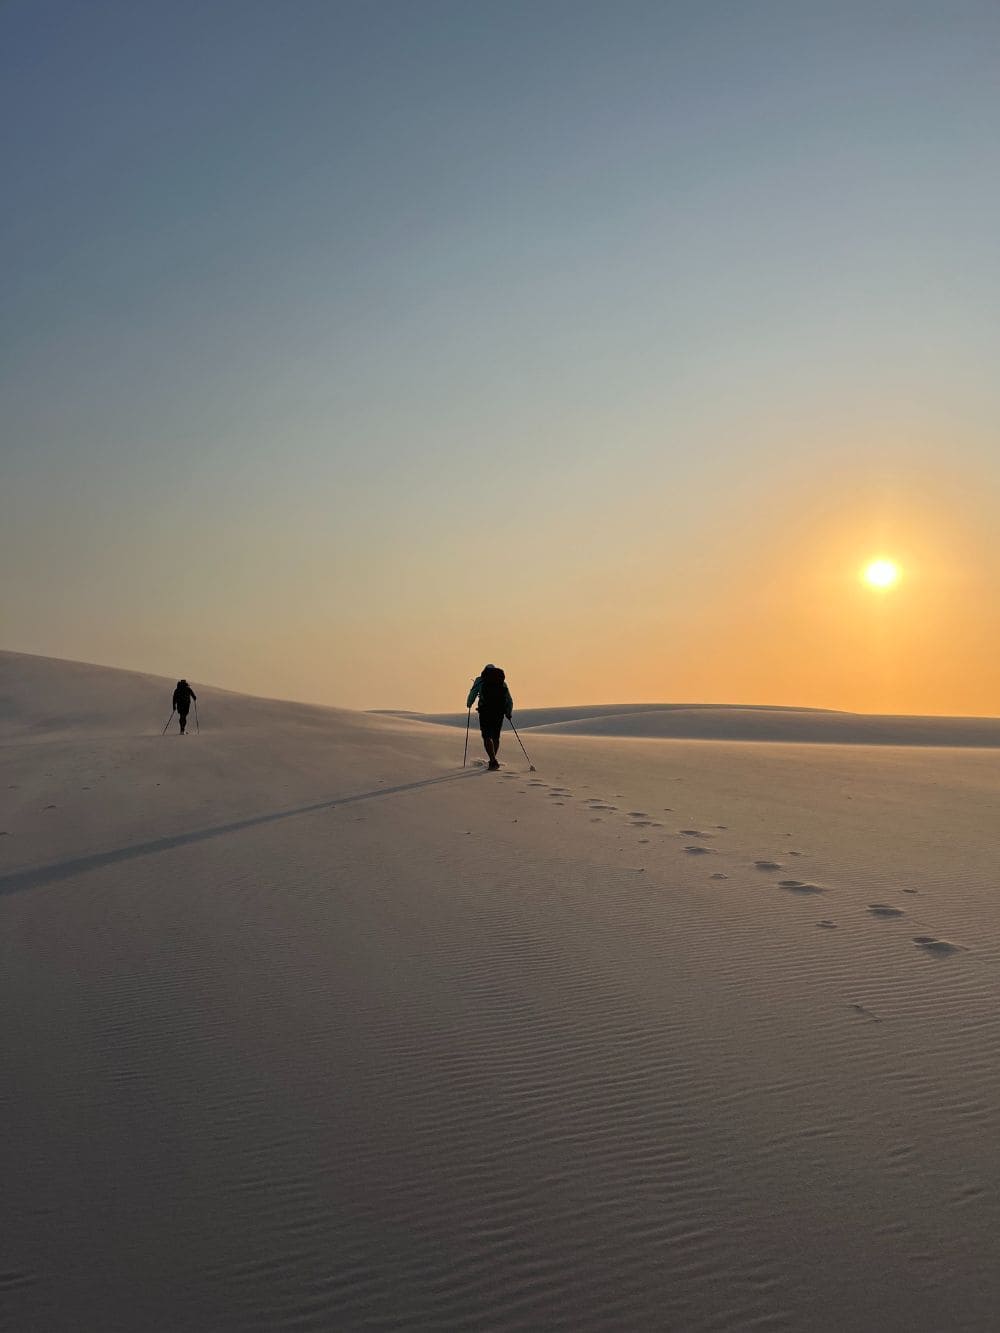 Ready to Discover Brazil's Sand Dunes?